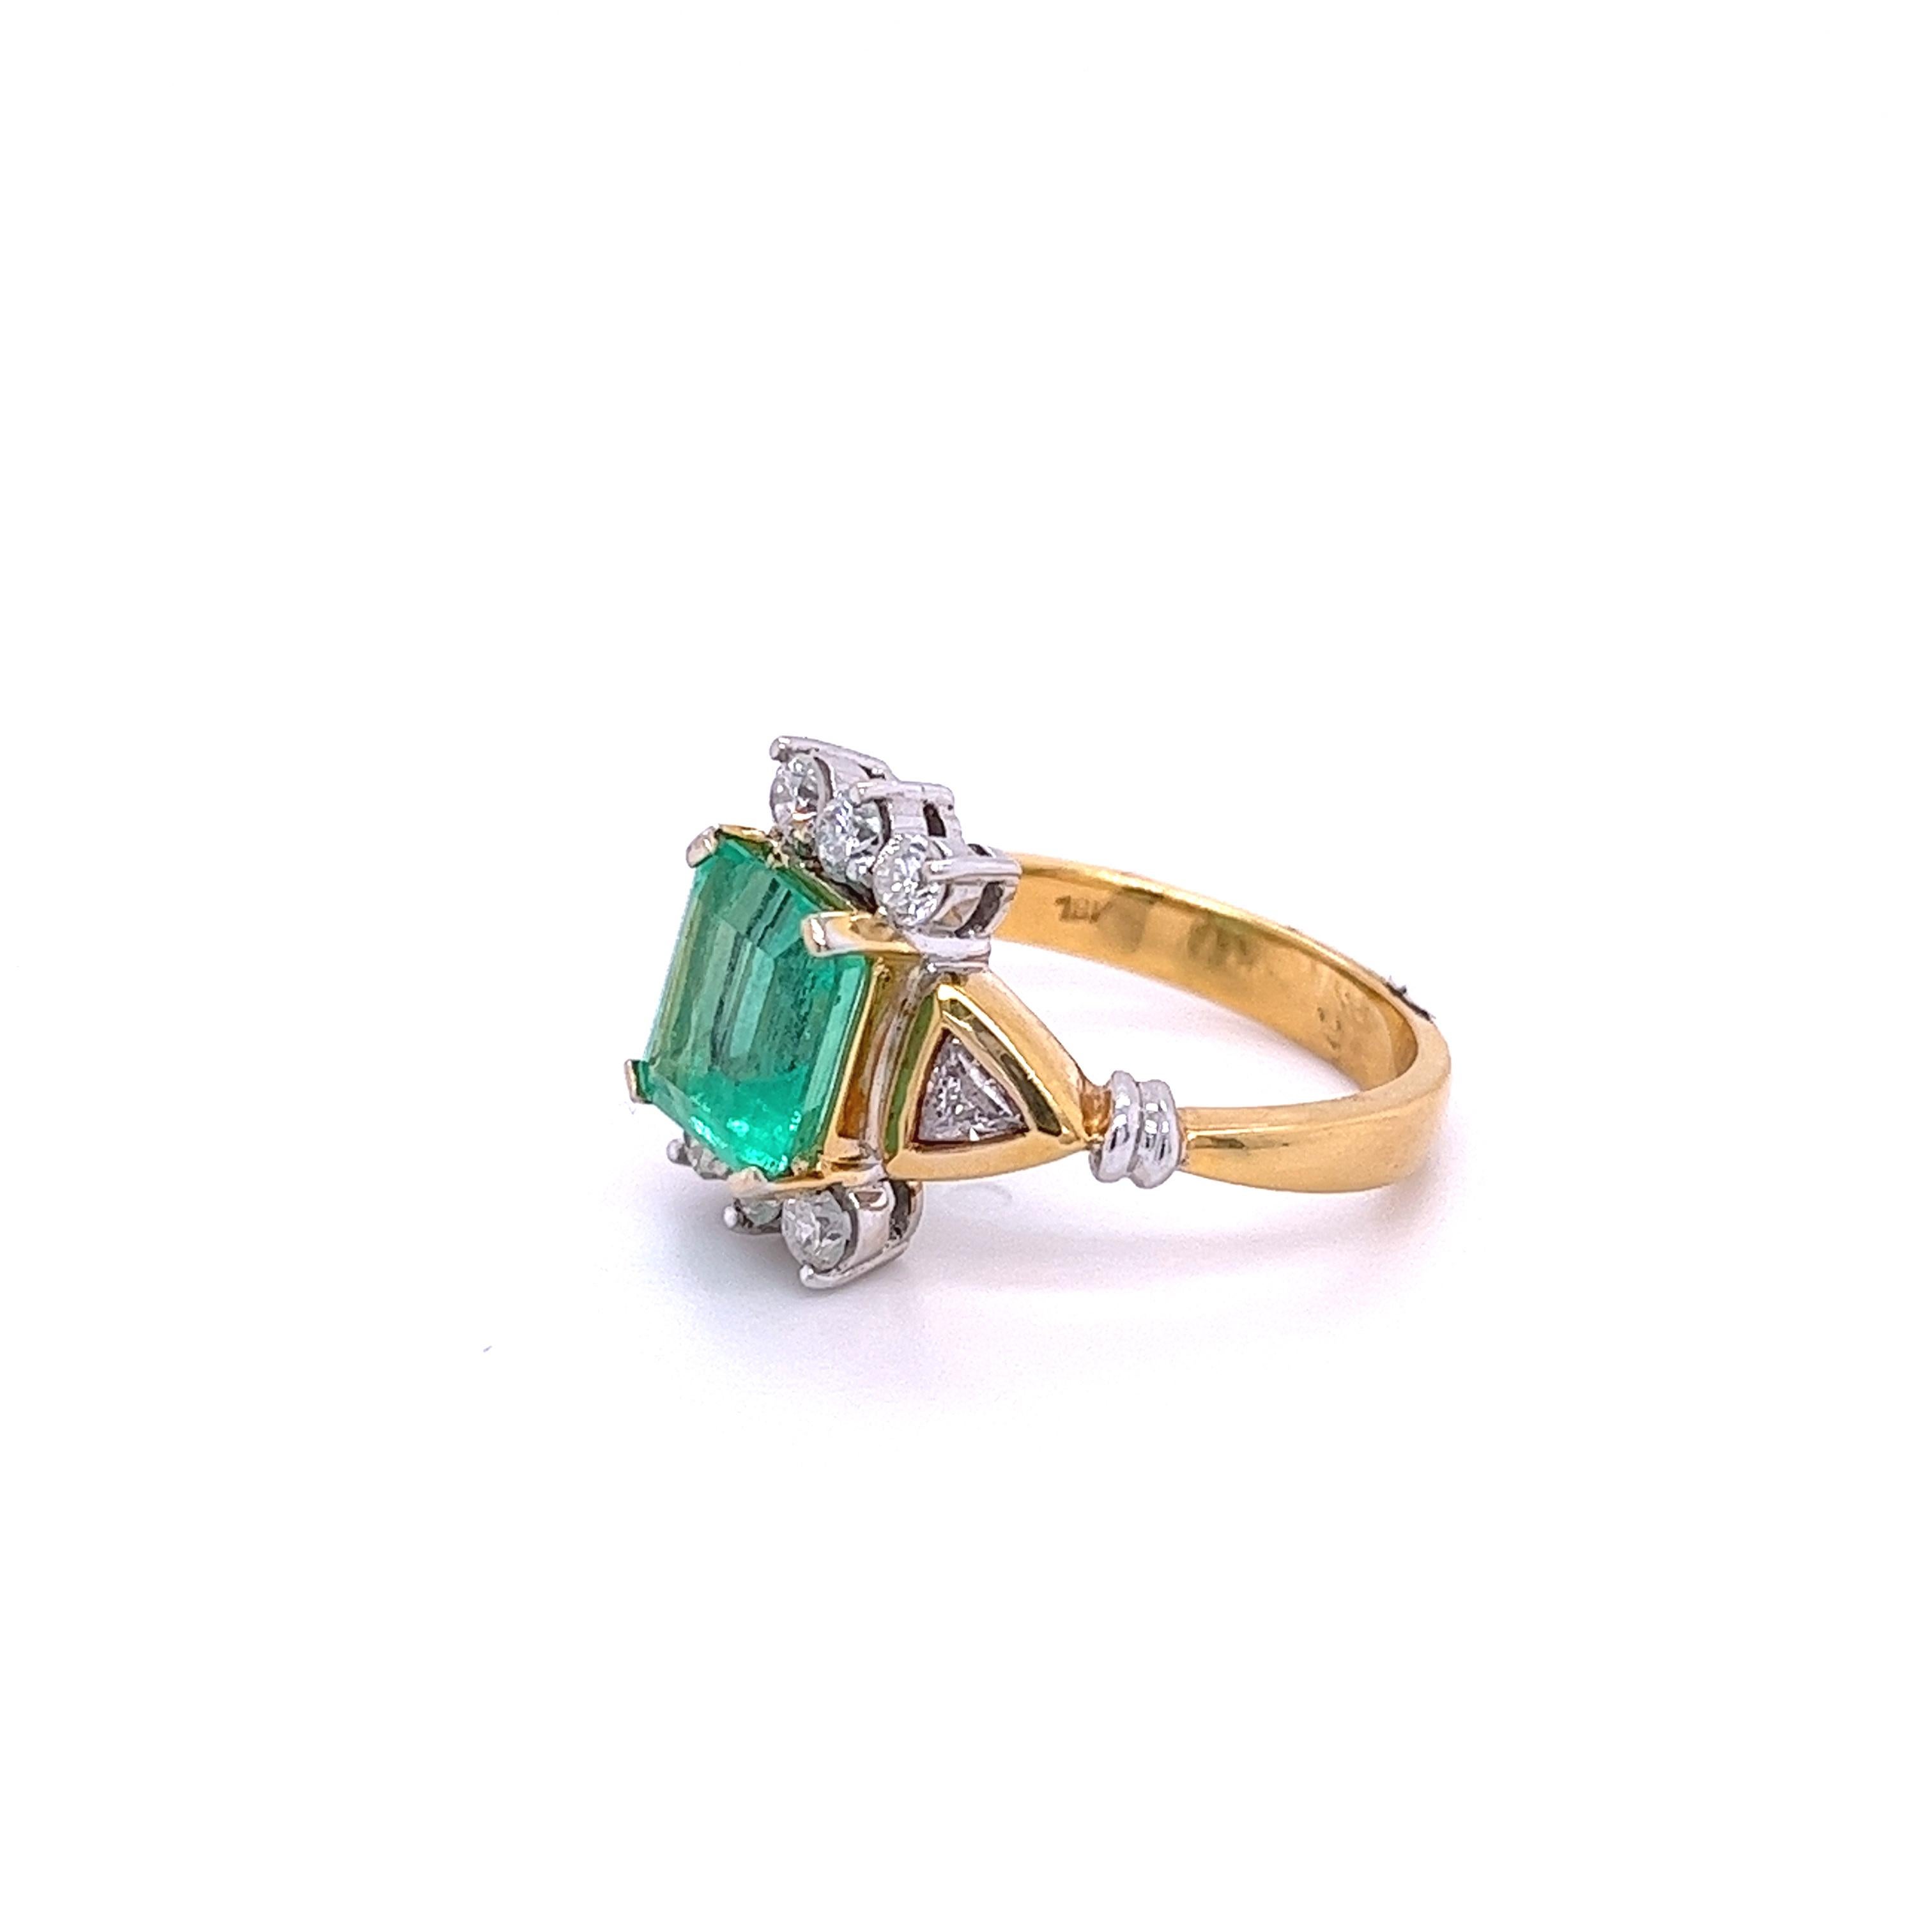 Emerald Cut 2.77 Carat Colombian Emerald and Trillion Cut Diamonds in 18k Yellow Gold Ring For Sale